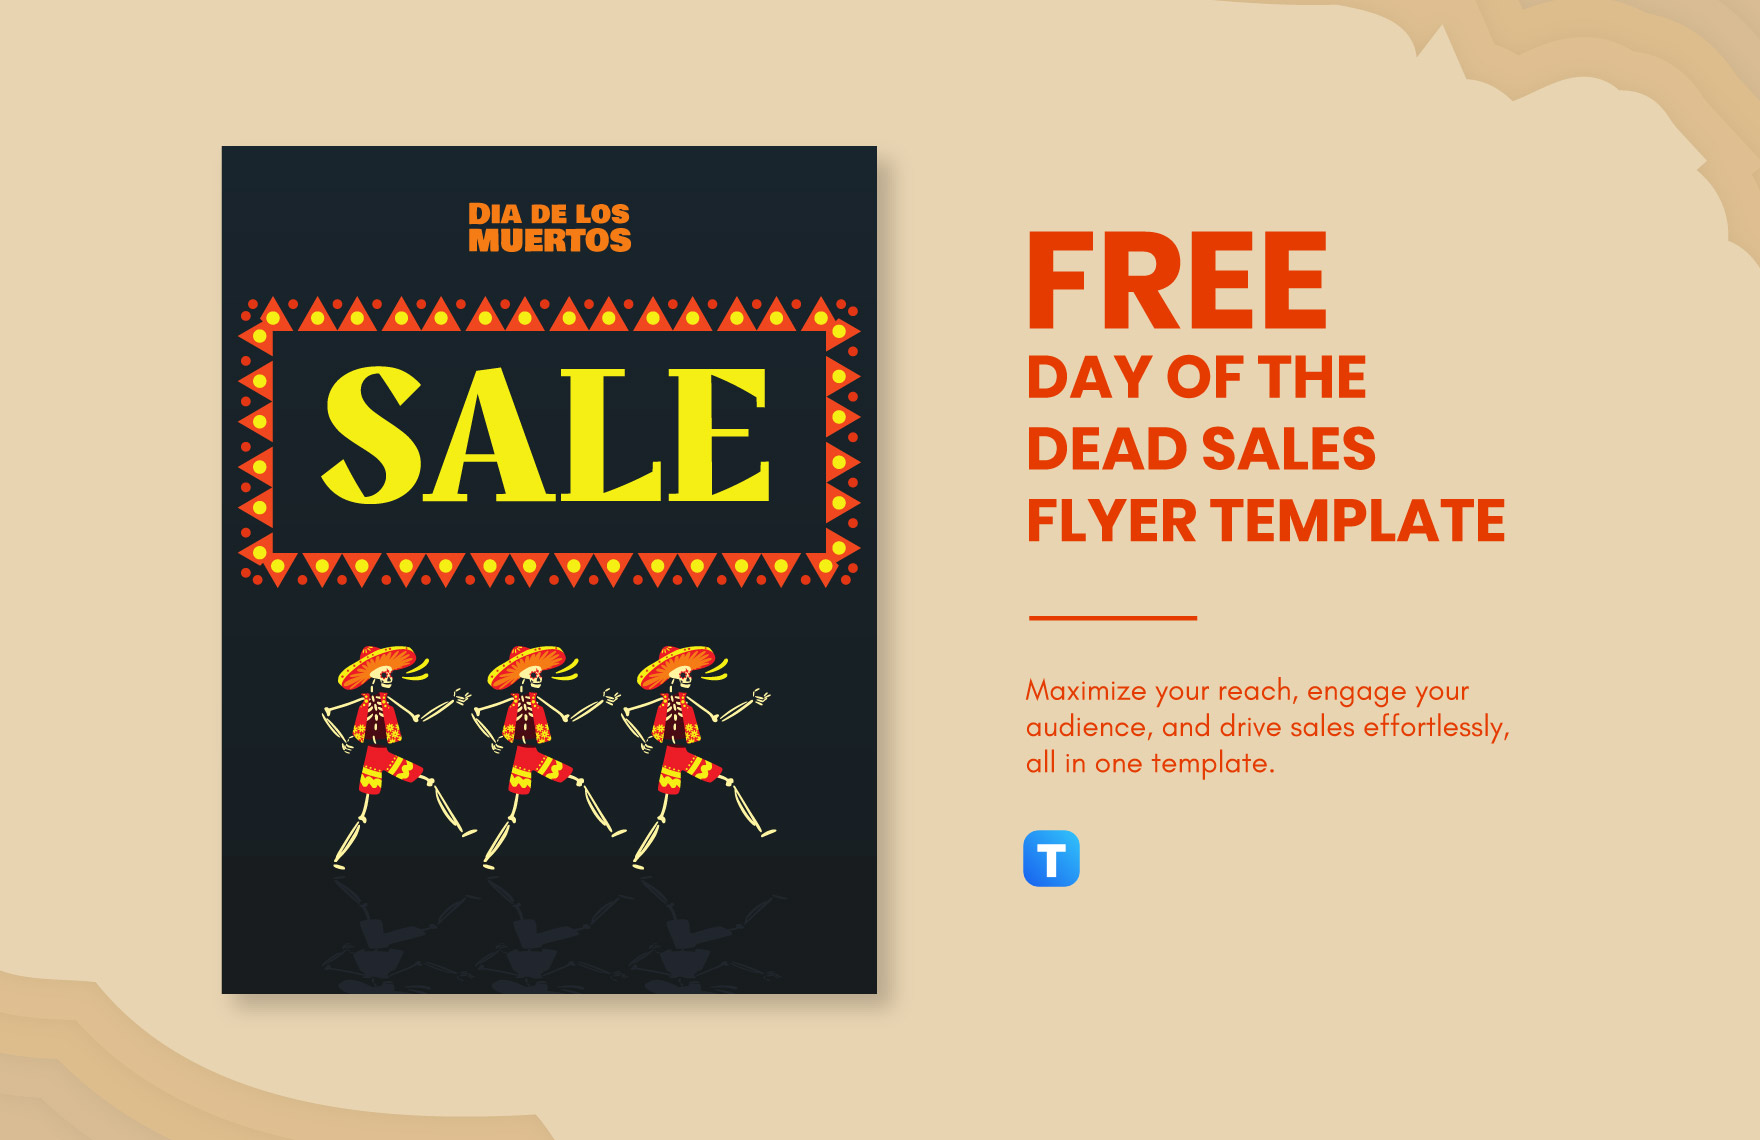 Day of the Dead Sales Flyer Template